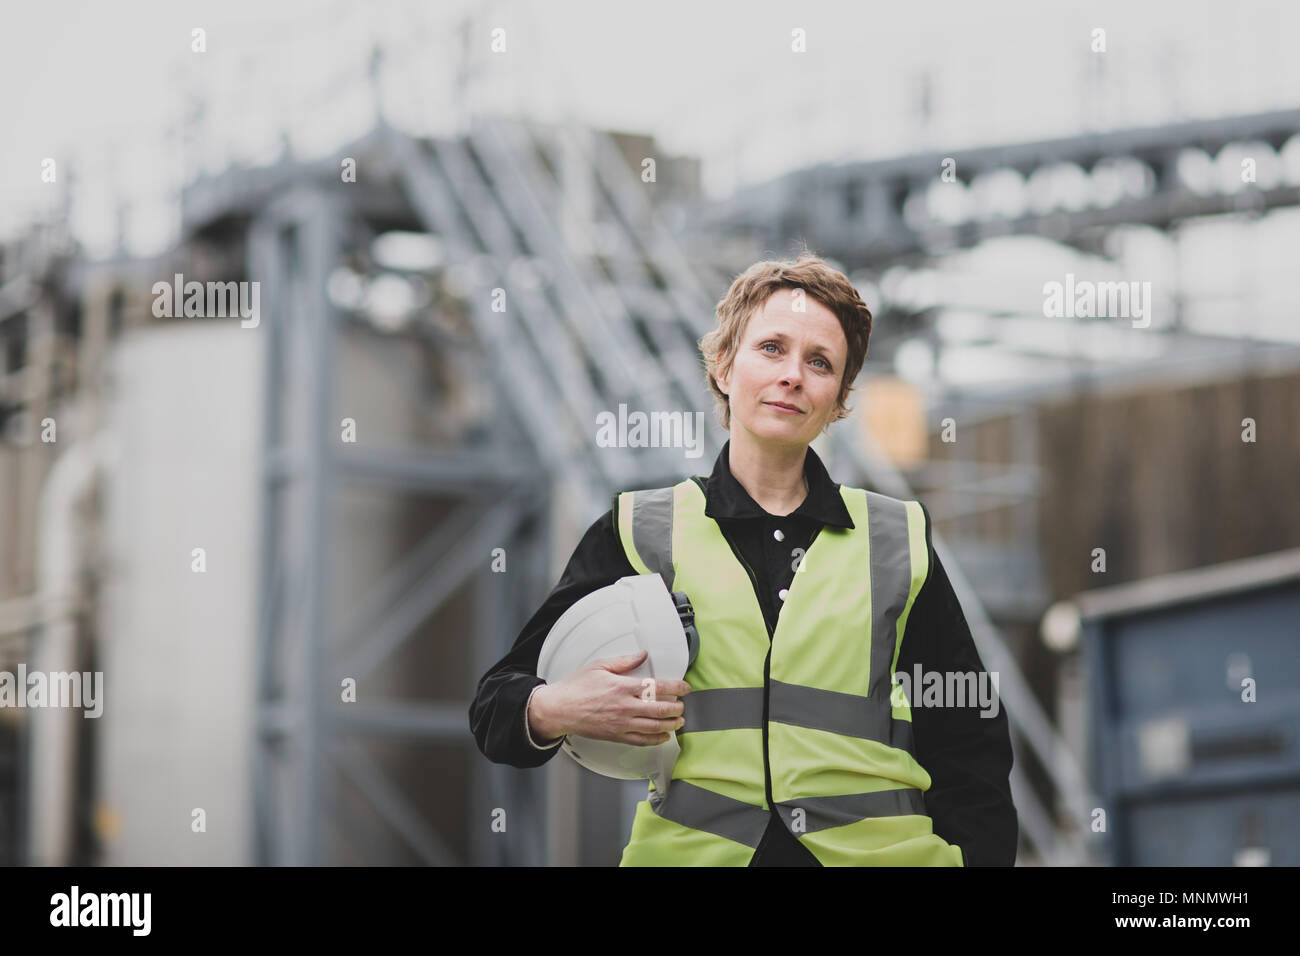 Female industrial worker on site Stock Photo